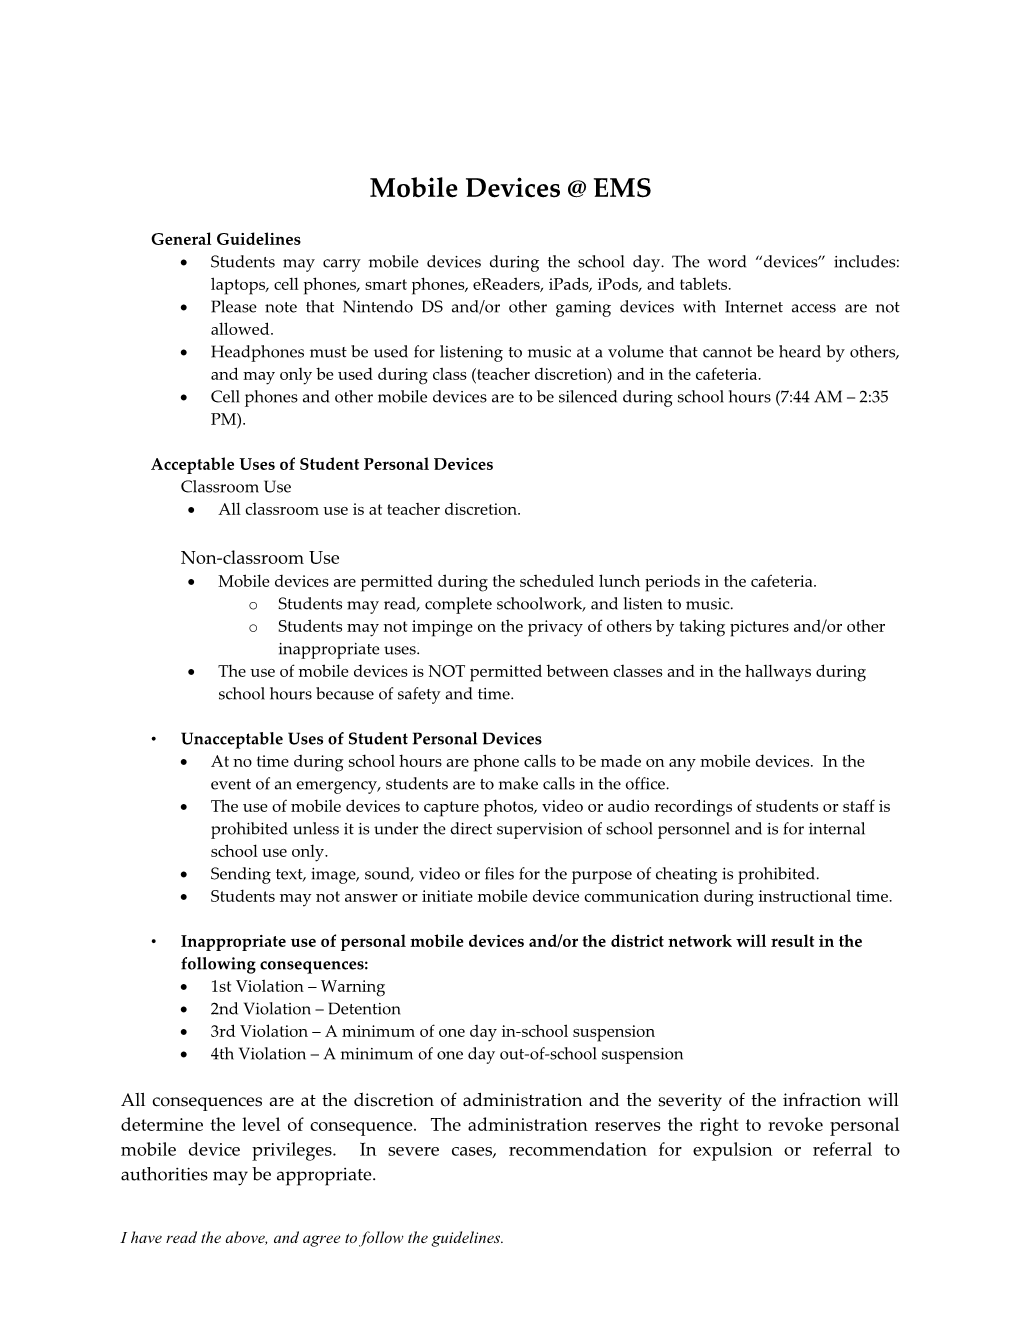 Mobile Devices EMS